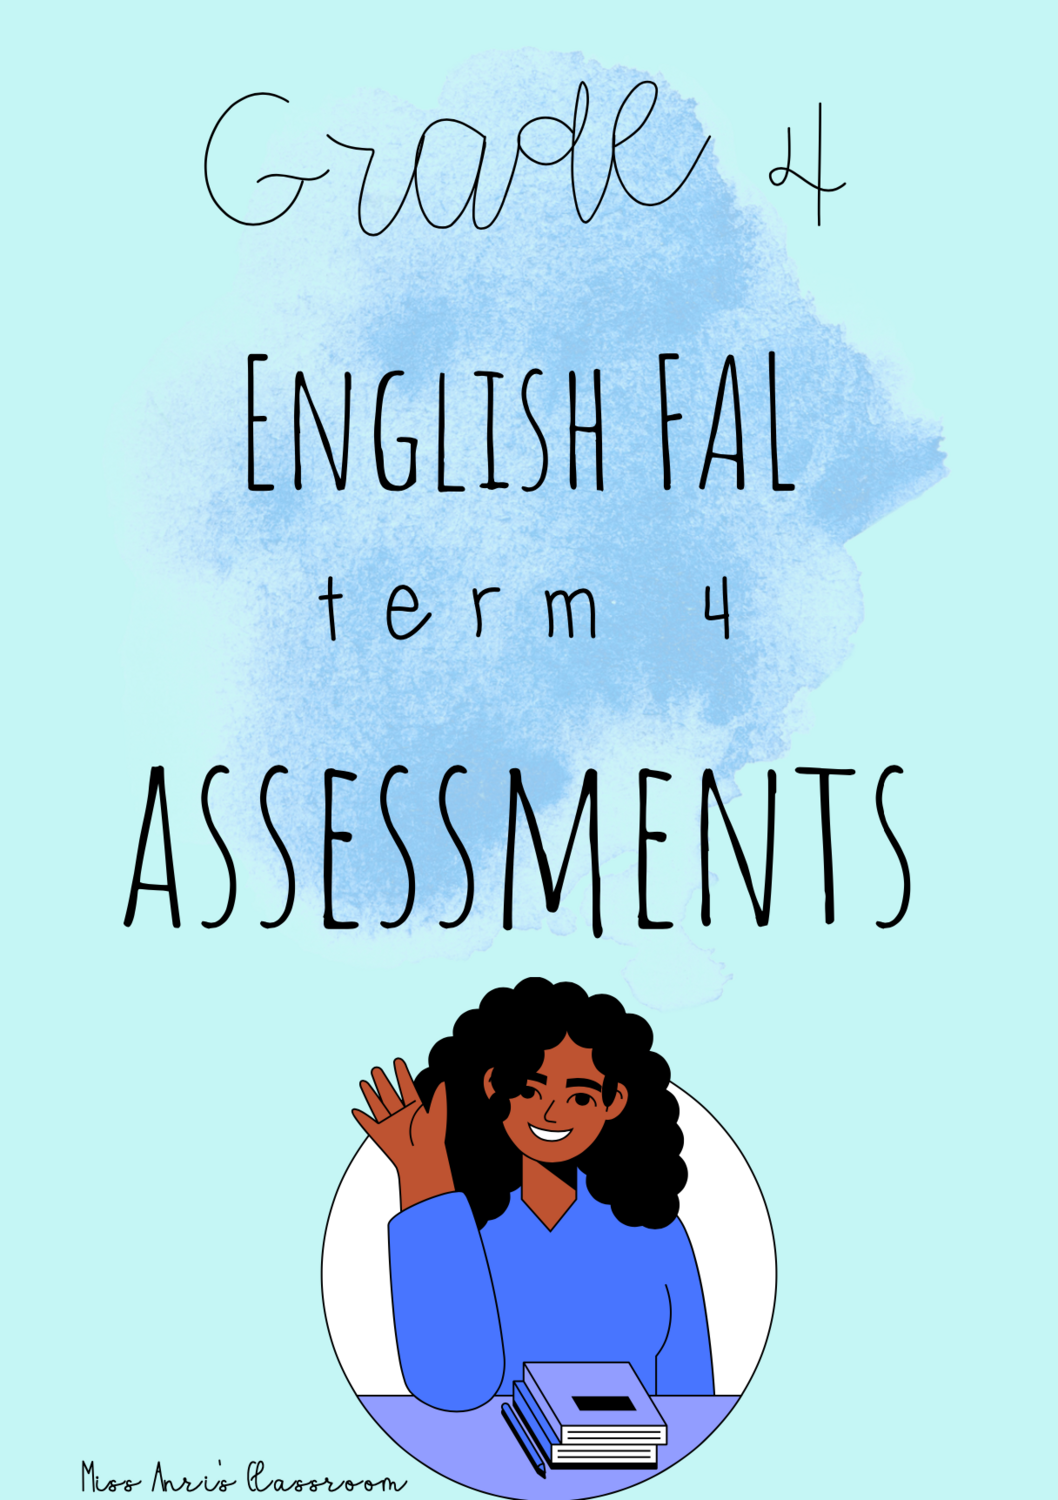 grade-4-english-first-additional-language-term-4-assessments